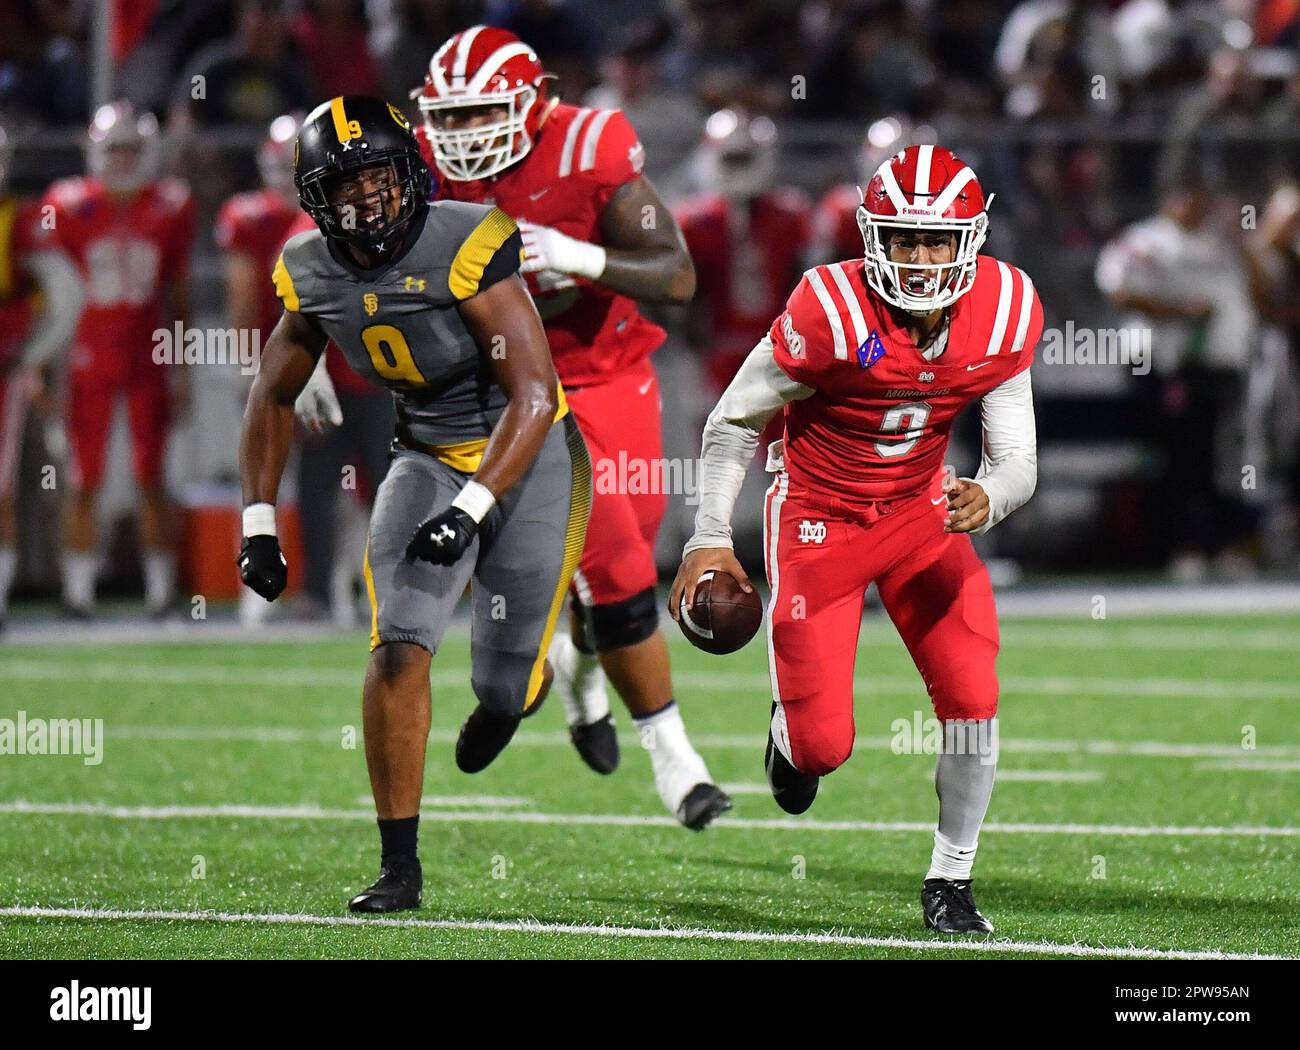 September 14, 2019 Bellflower, CA.Top Prep Quarterback prospect Bryce Young #9 of Mater Dei in action vs. St. Francis Academy Panthers of Maryland.Mater Dei Monarchs vs.St. Francis Academy Panthers of Maryland..Trinity League vs. the USA Showcase.St. Francis Academy Panthers vs. Mater Dei Monarchs in Bellflower, California..Louis Lopez/Modern Exposure/Cal Sport Media. Stock Photo